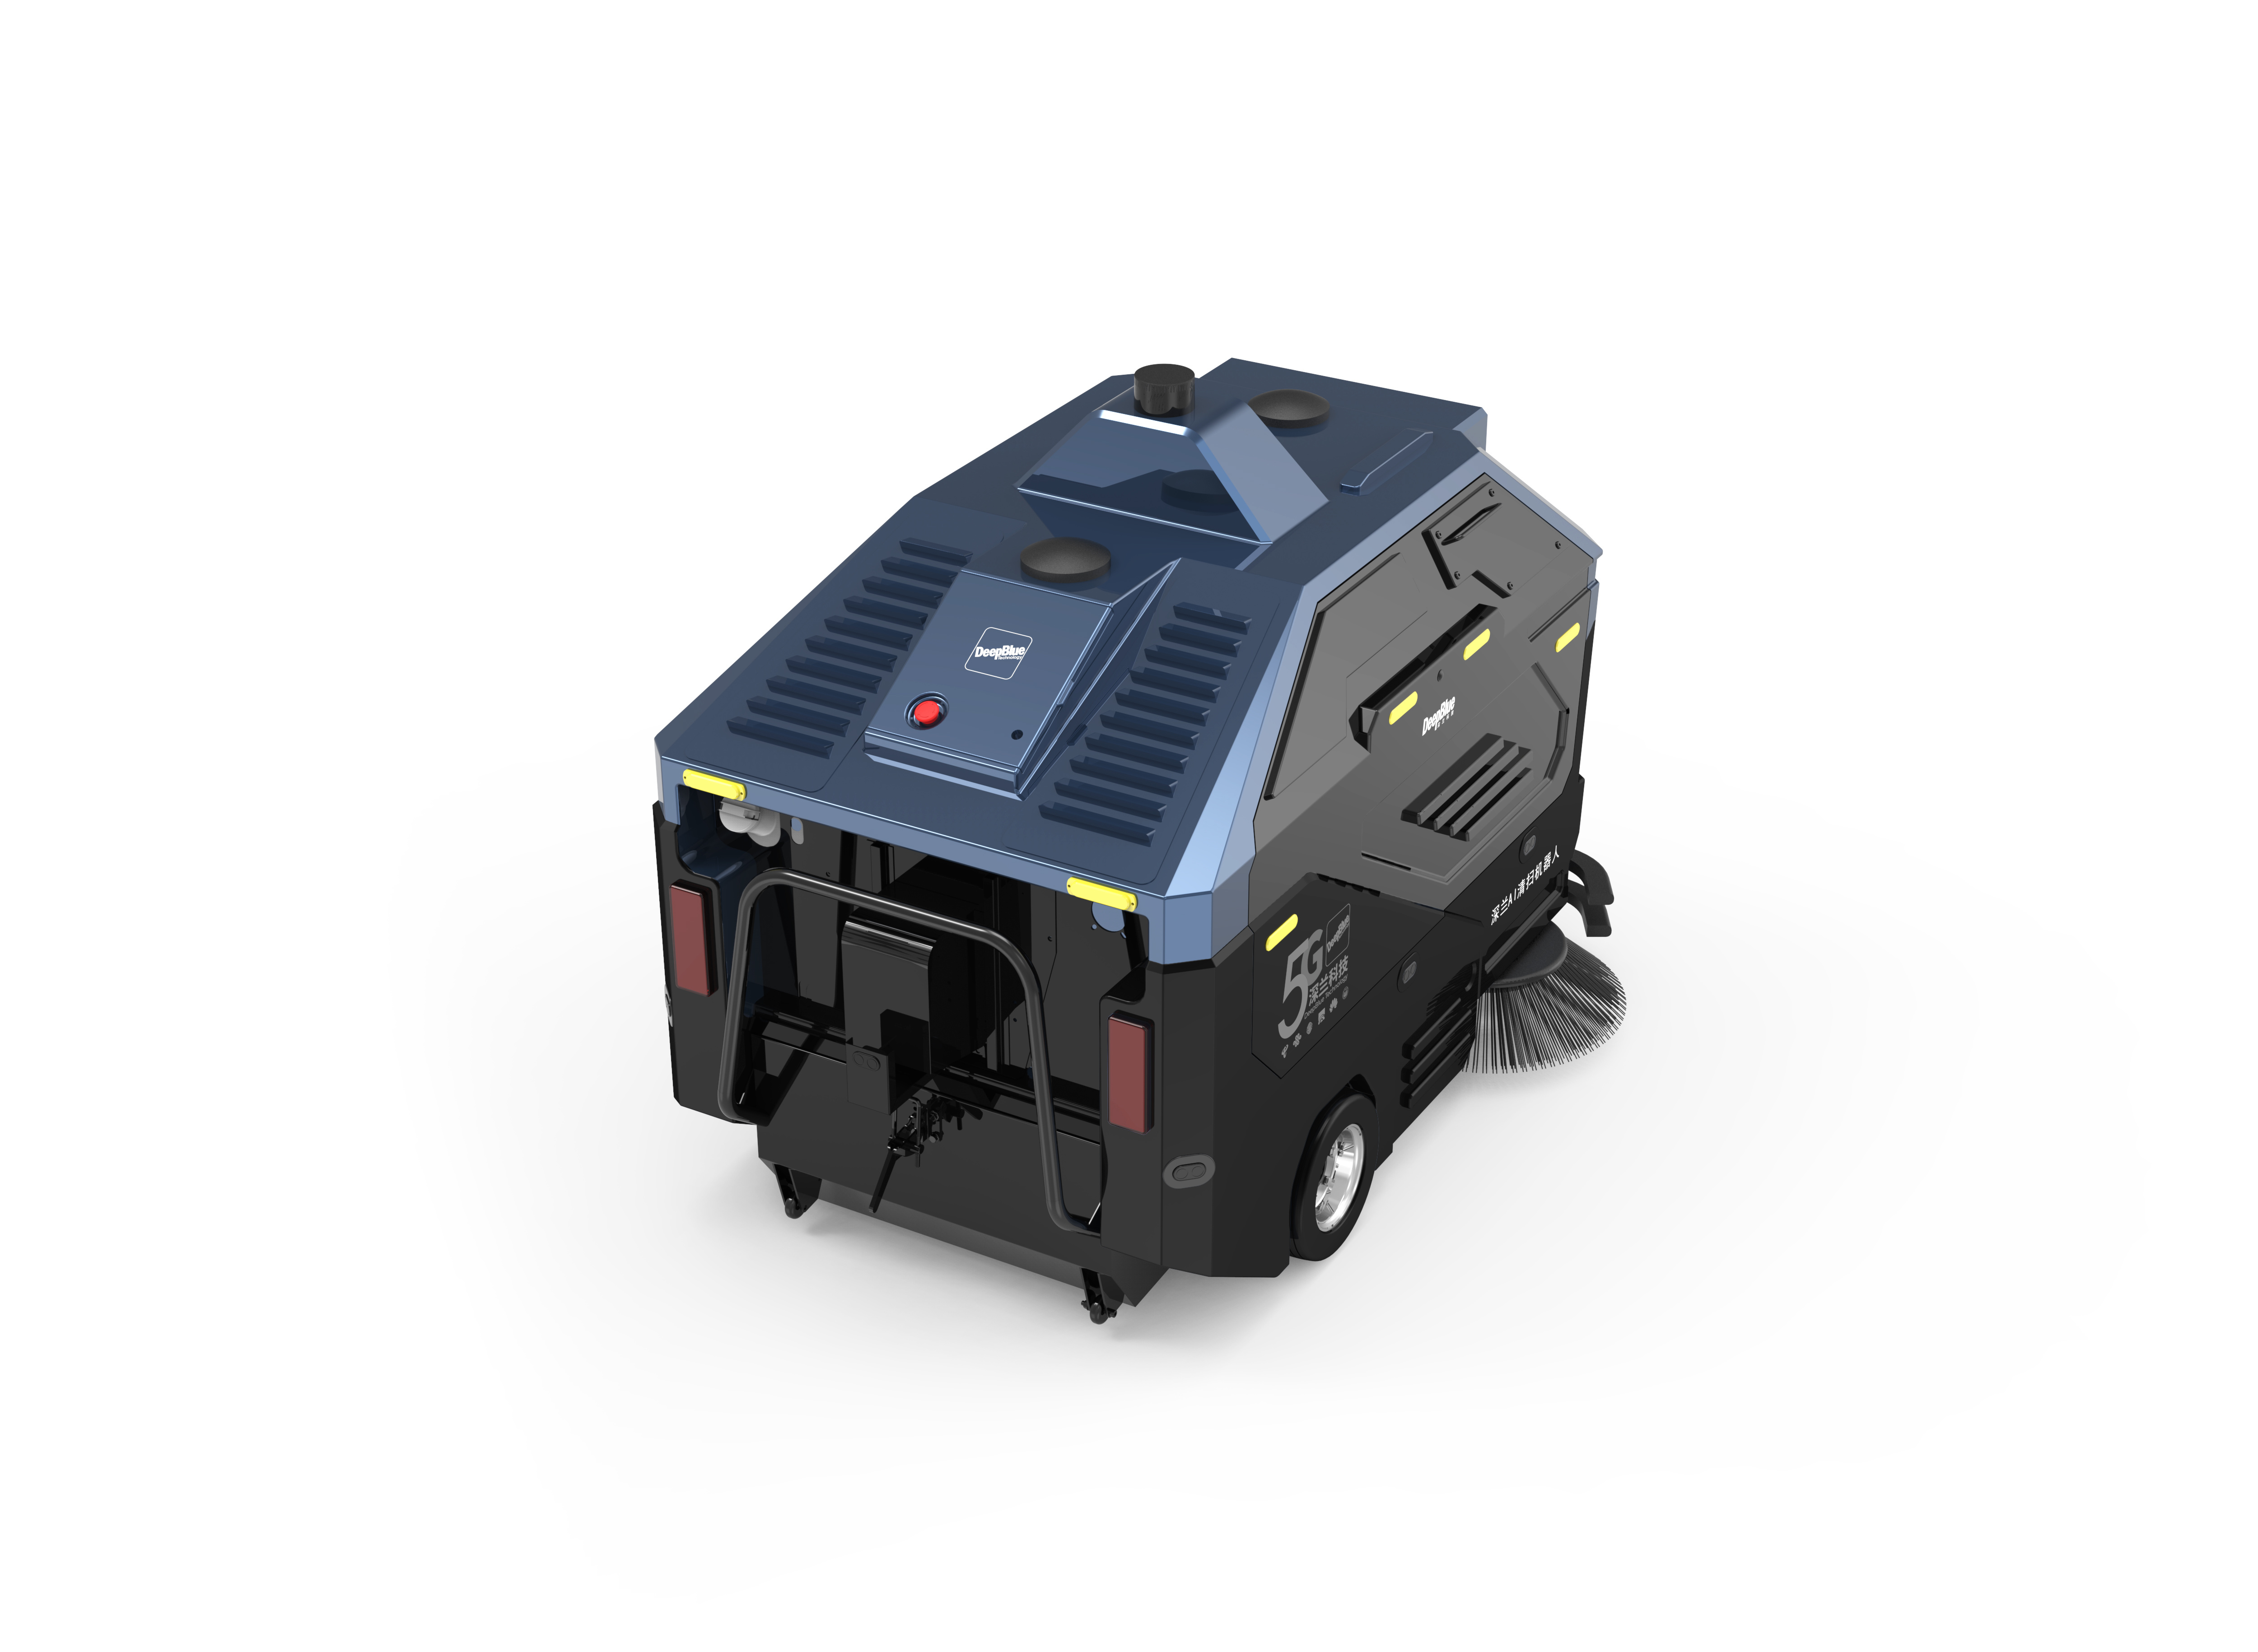 Outdoor Sweeper Robot company